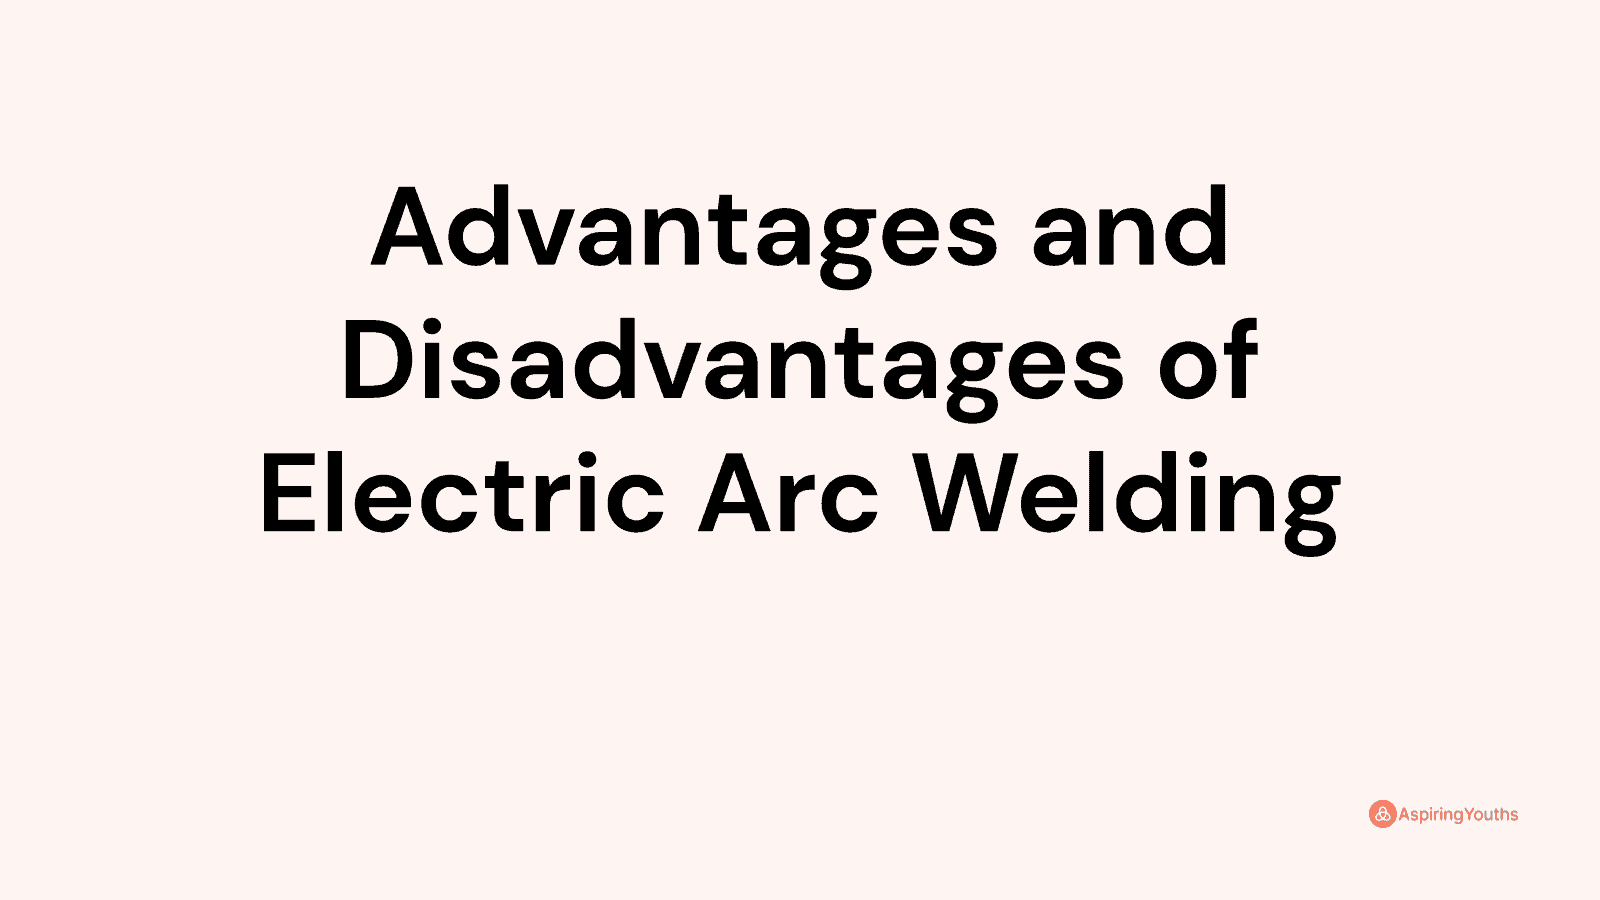 Advantages and disadvantages of Electric Arc Welding